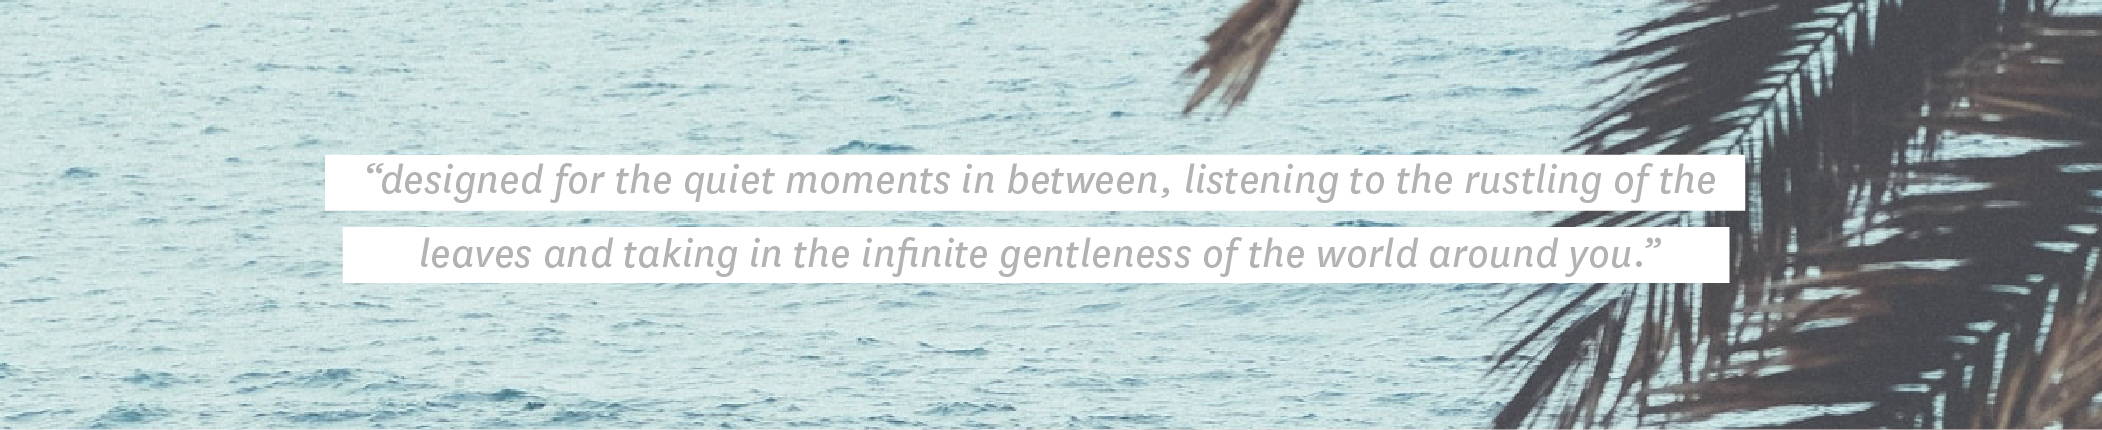 Quote: "designed for the quiet moments in between, listening to the rustling of the leaves and tak-ing in the infinite gentleness of the world around you."